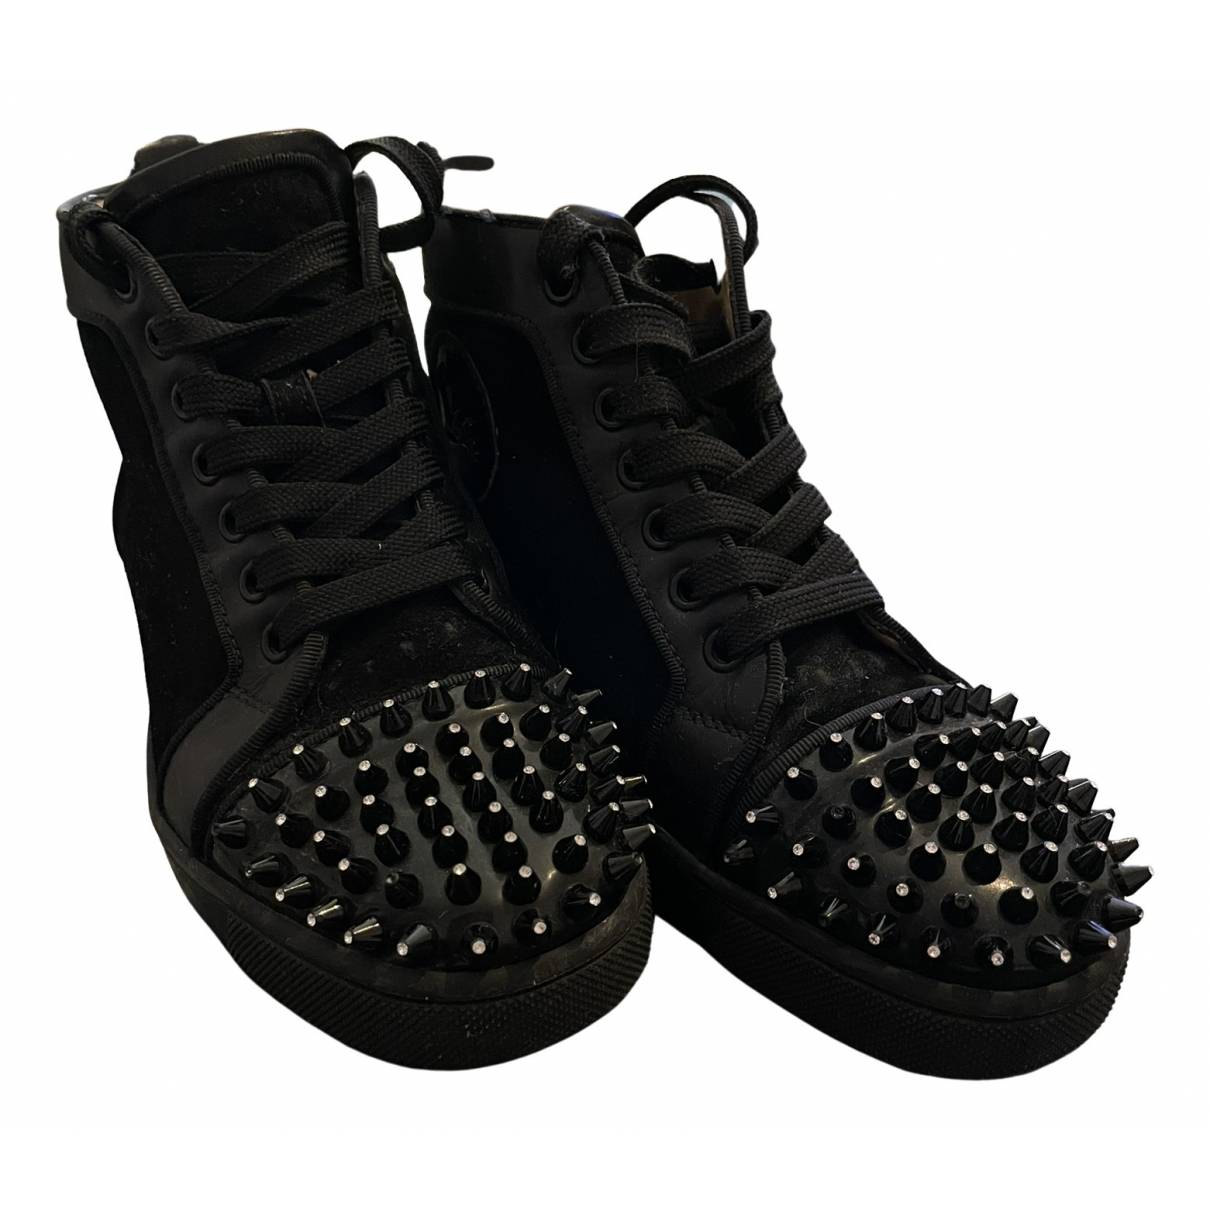 Lou spikes trainers Christian Louboutin Black 35.5 EU in Leather -